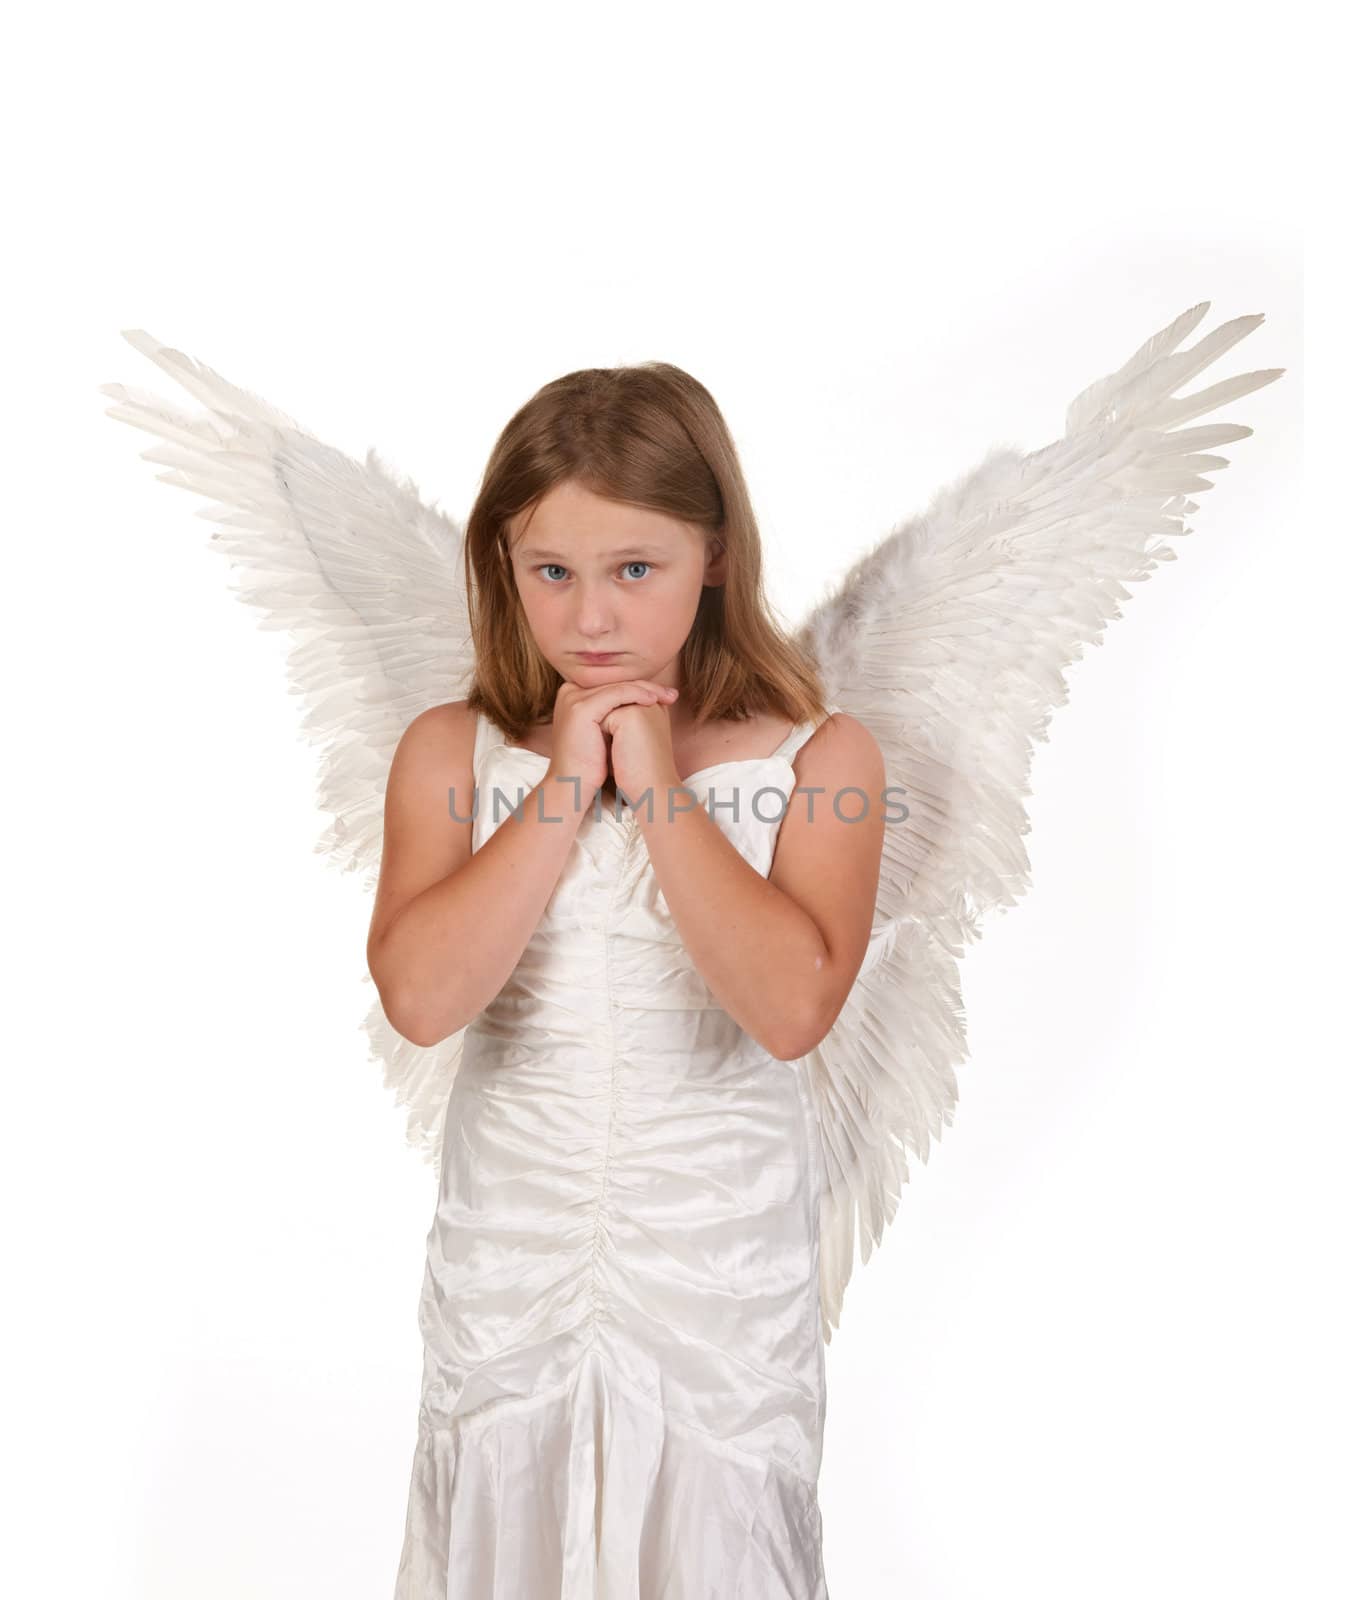 pure and sweet little angel girl isolated on white